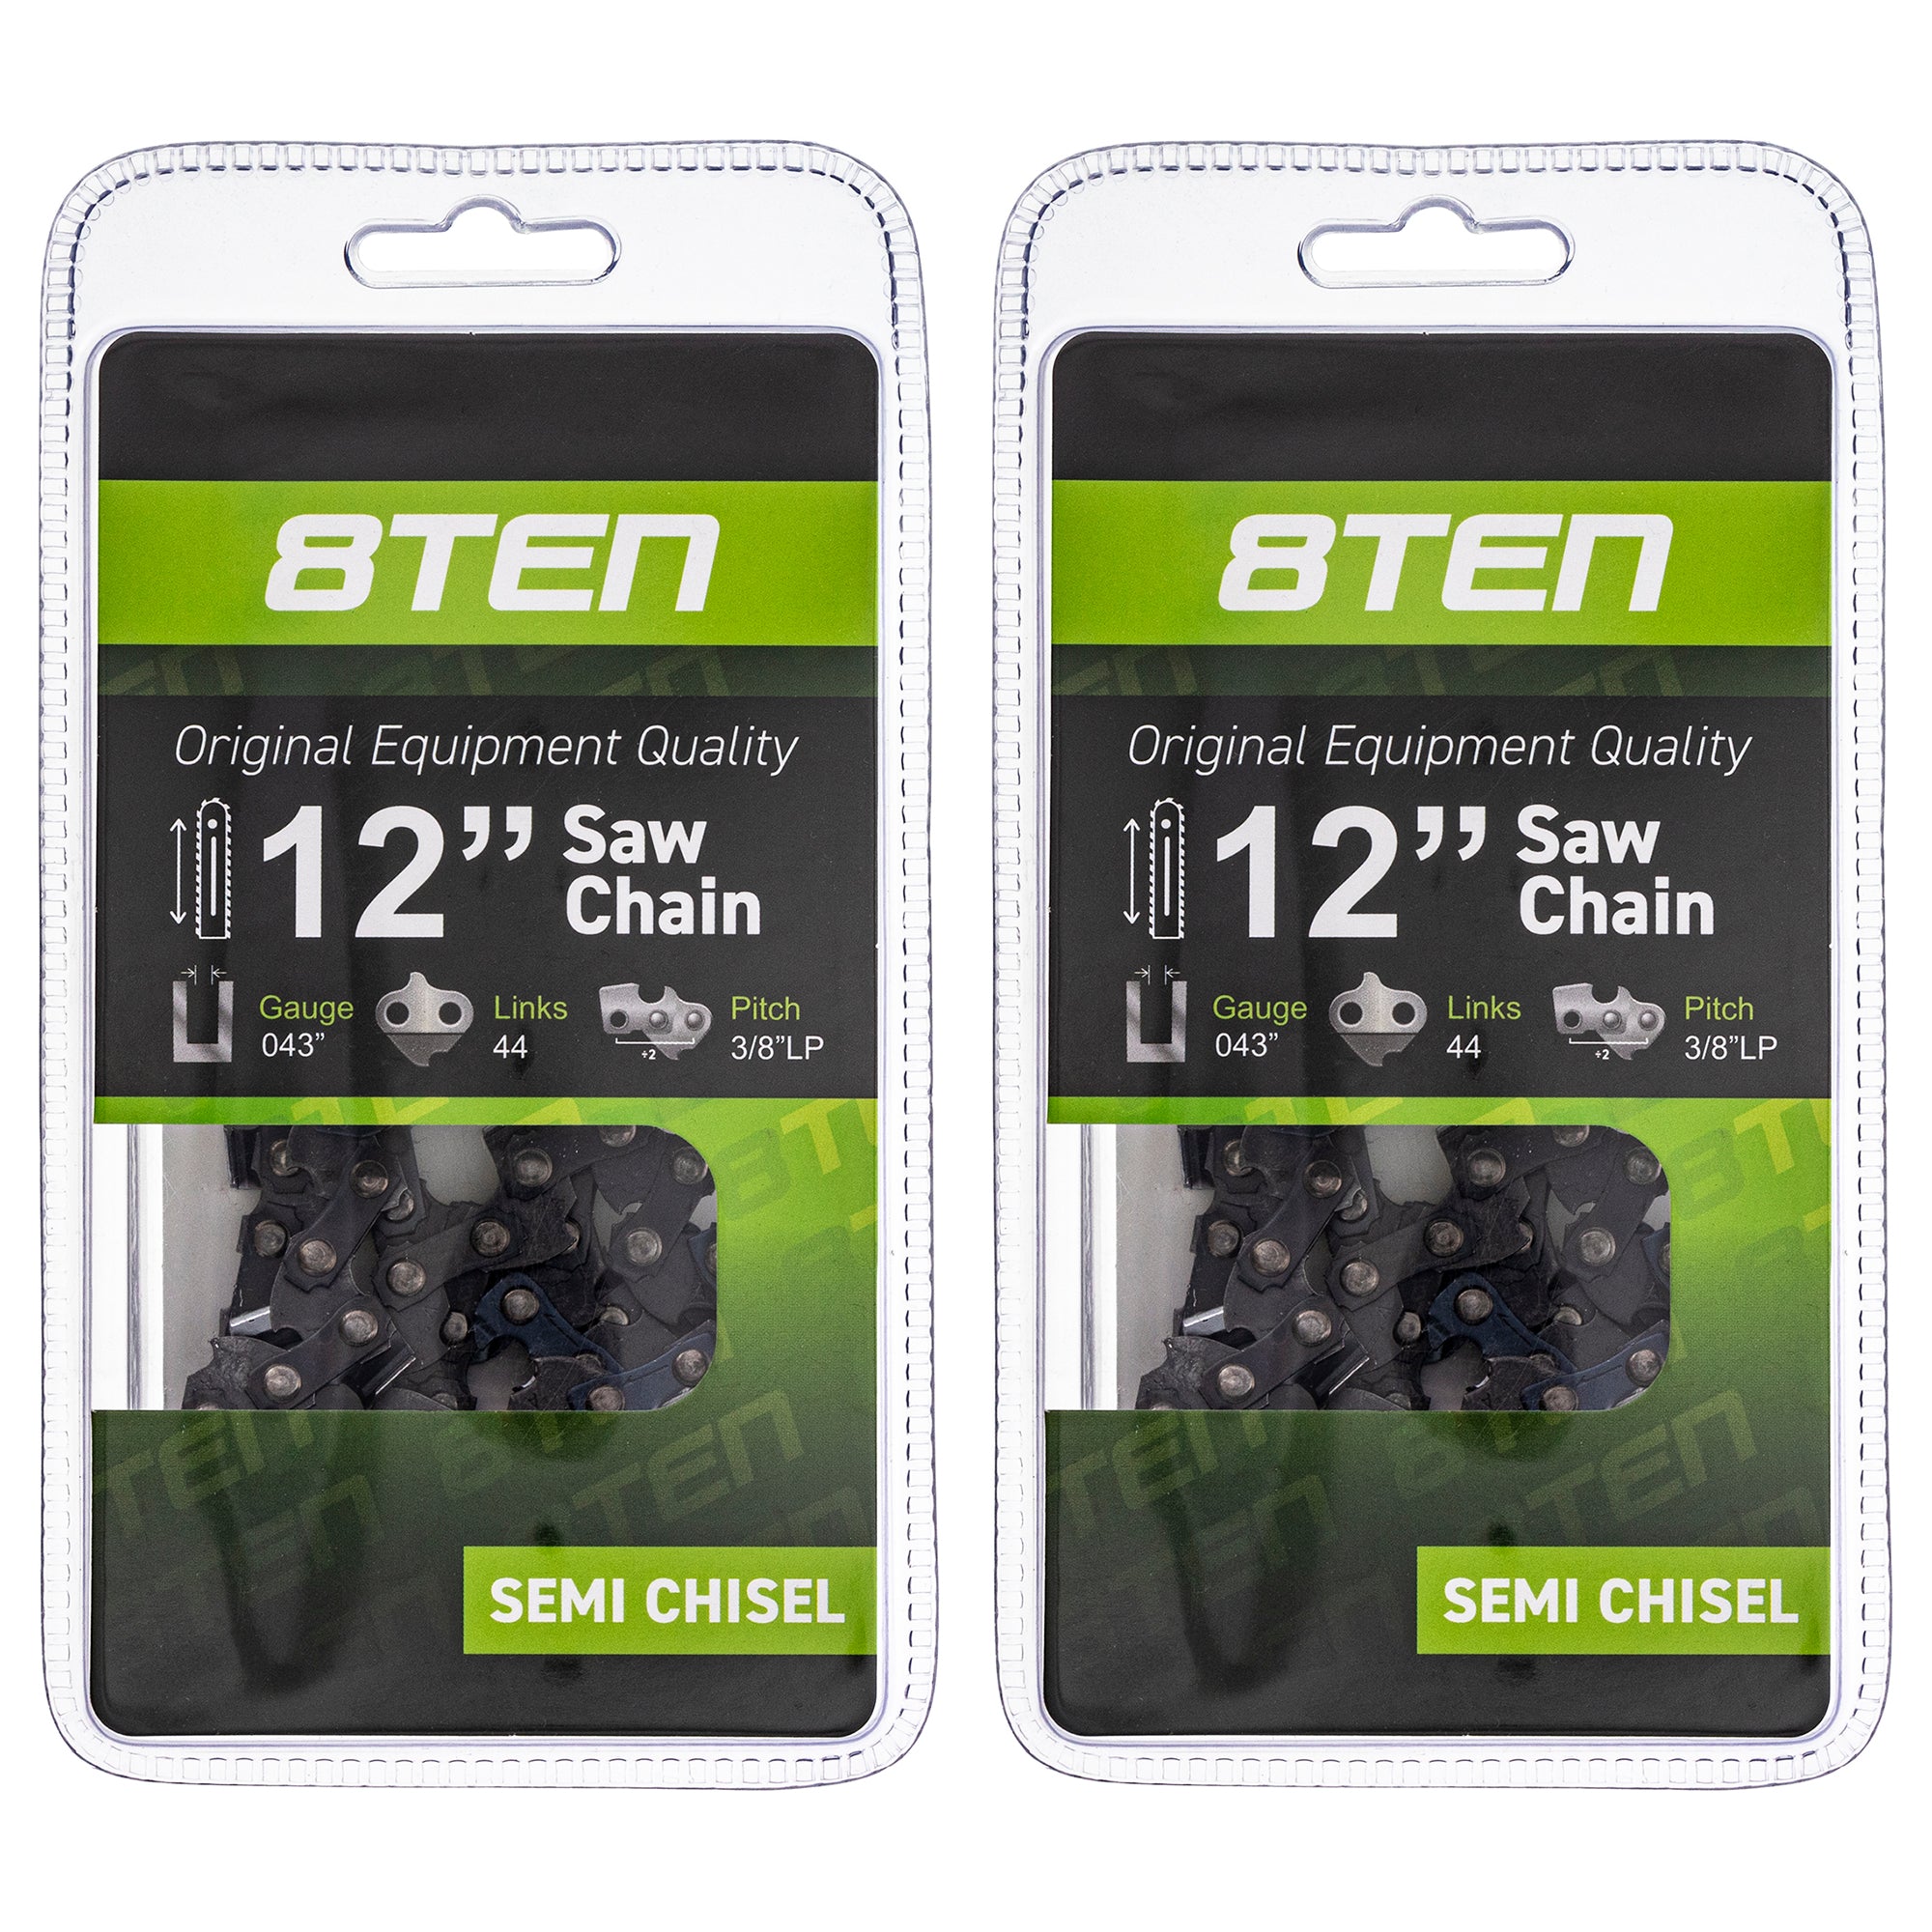 Chainsaw Chain 12 Inch .043 3/8 44DL 2-Pack for zOTHER Stens Oregon Ref. Oregon Carlton 8TEN 810-CCC2248H